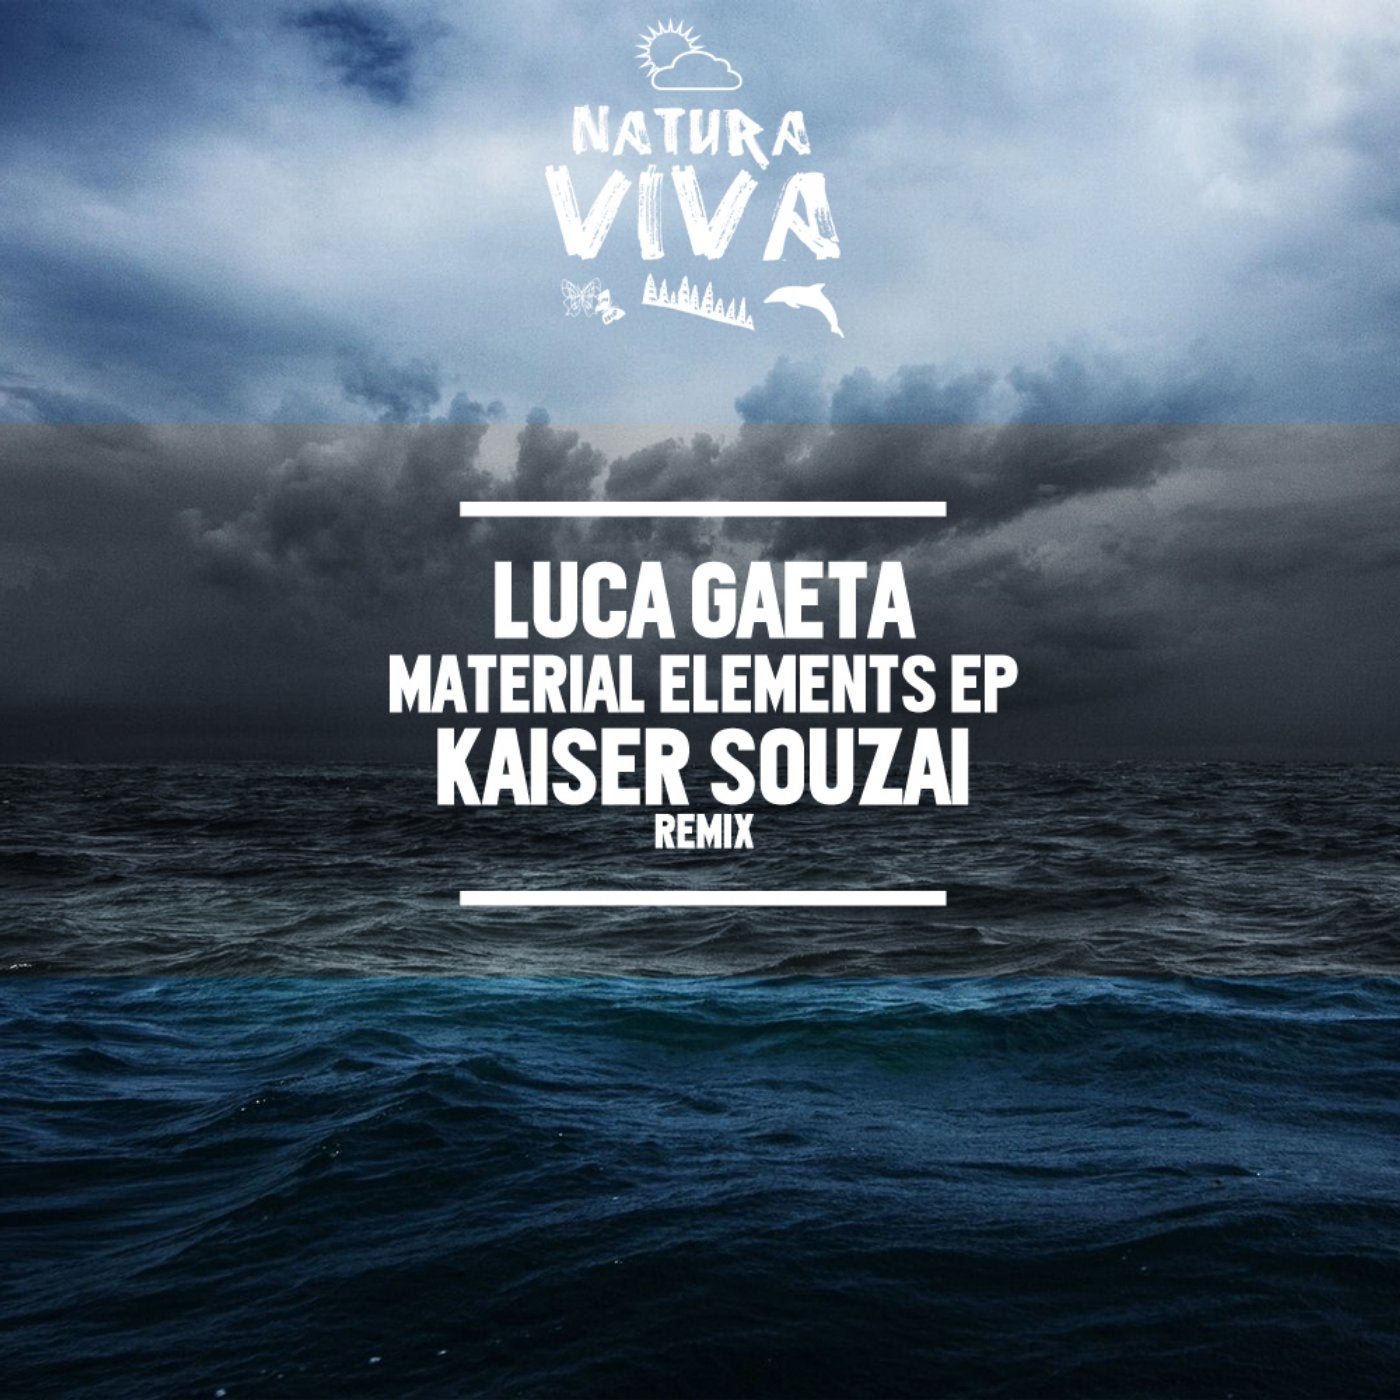 Material Elements Ep